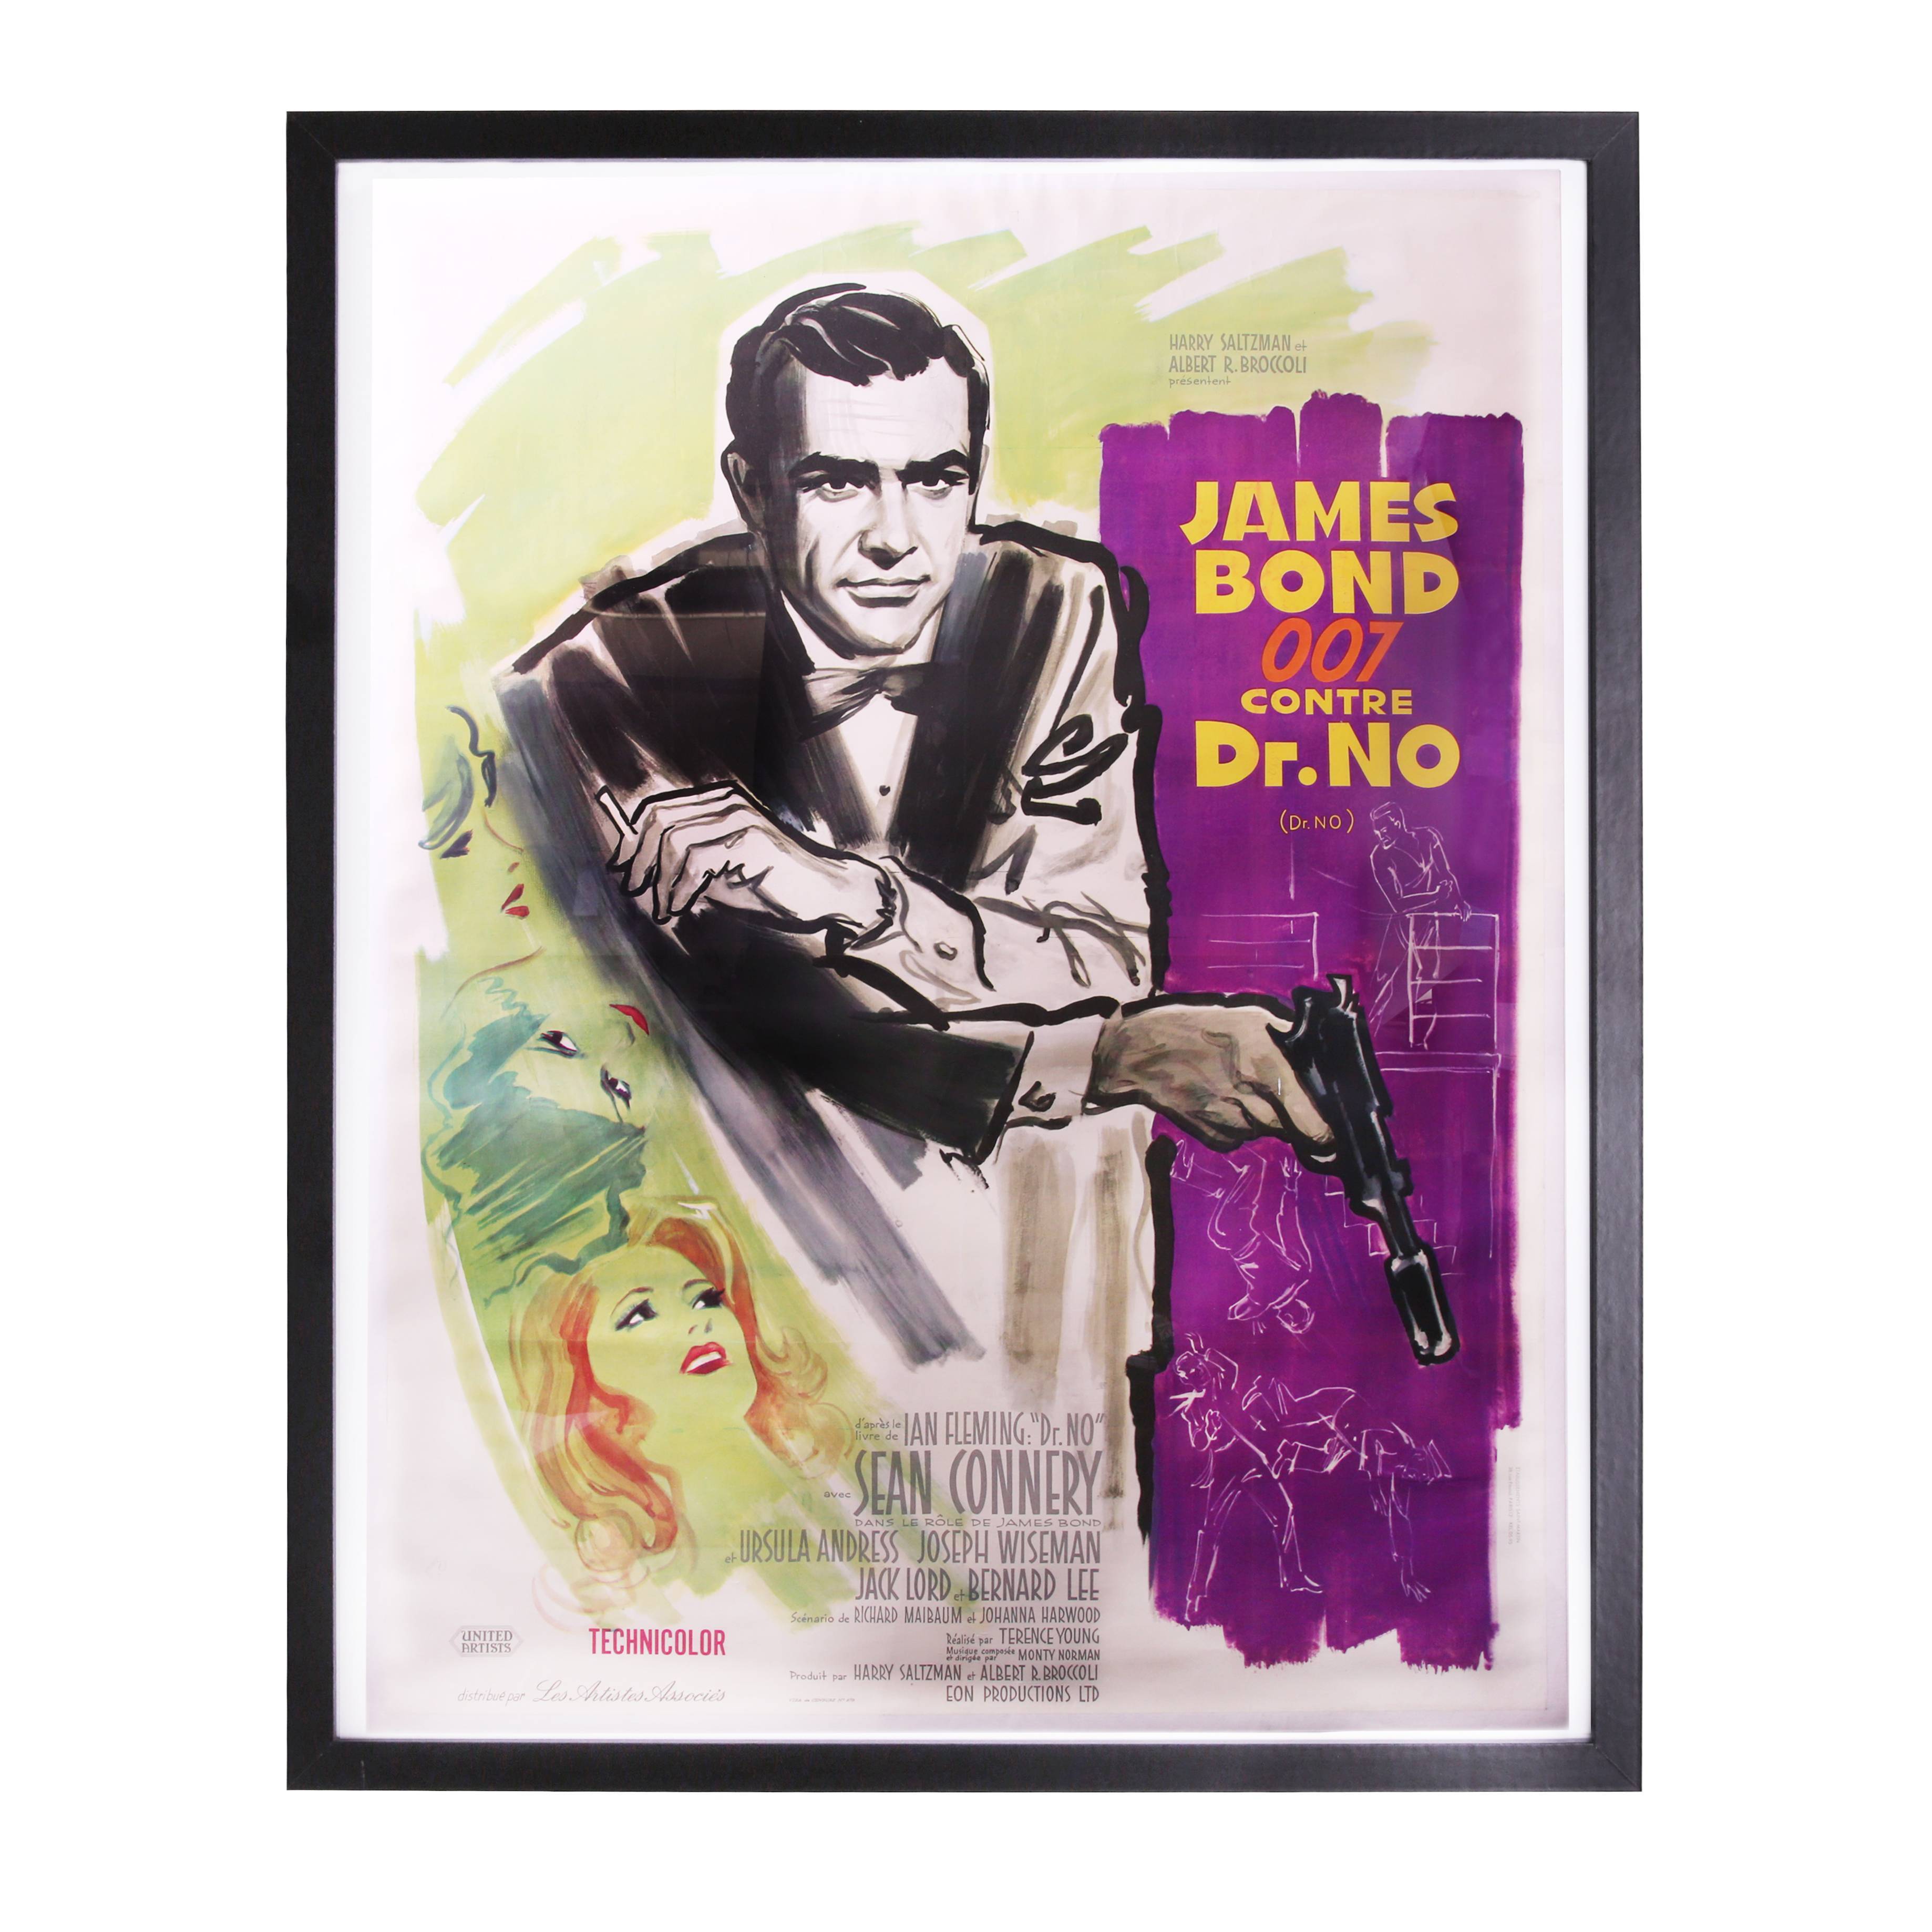 Original poster from the movie "Dr No" - 1962, with Sean Connery, backed on linen and framed - 00pp